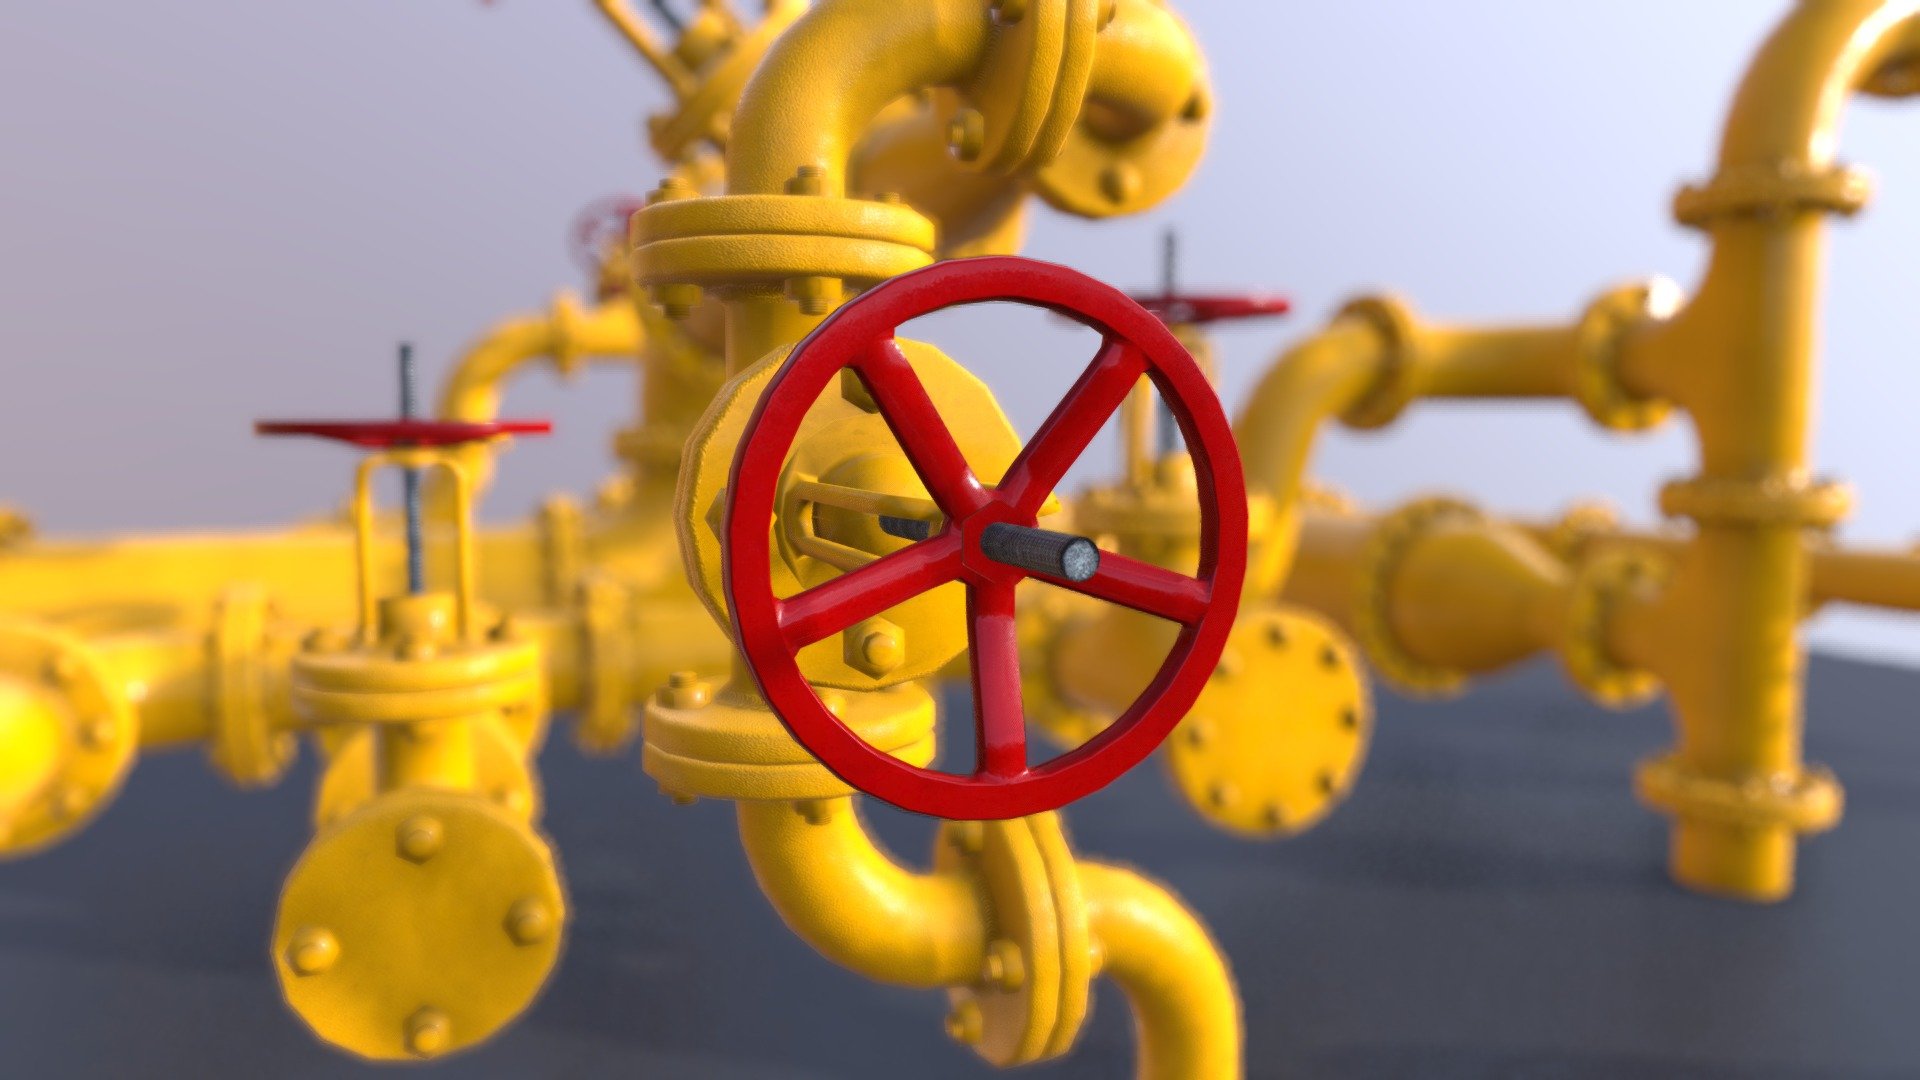 PBR Industrial Pipes / low-poly 3D model - PBR Industrial Pipes - 3D model by de_morgan 3d model